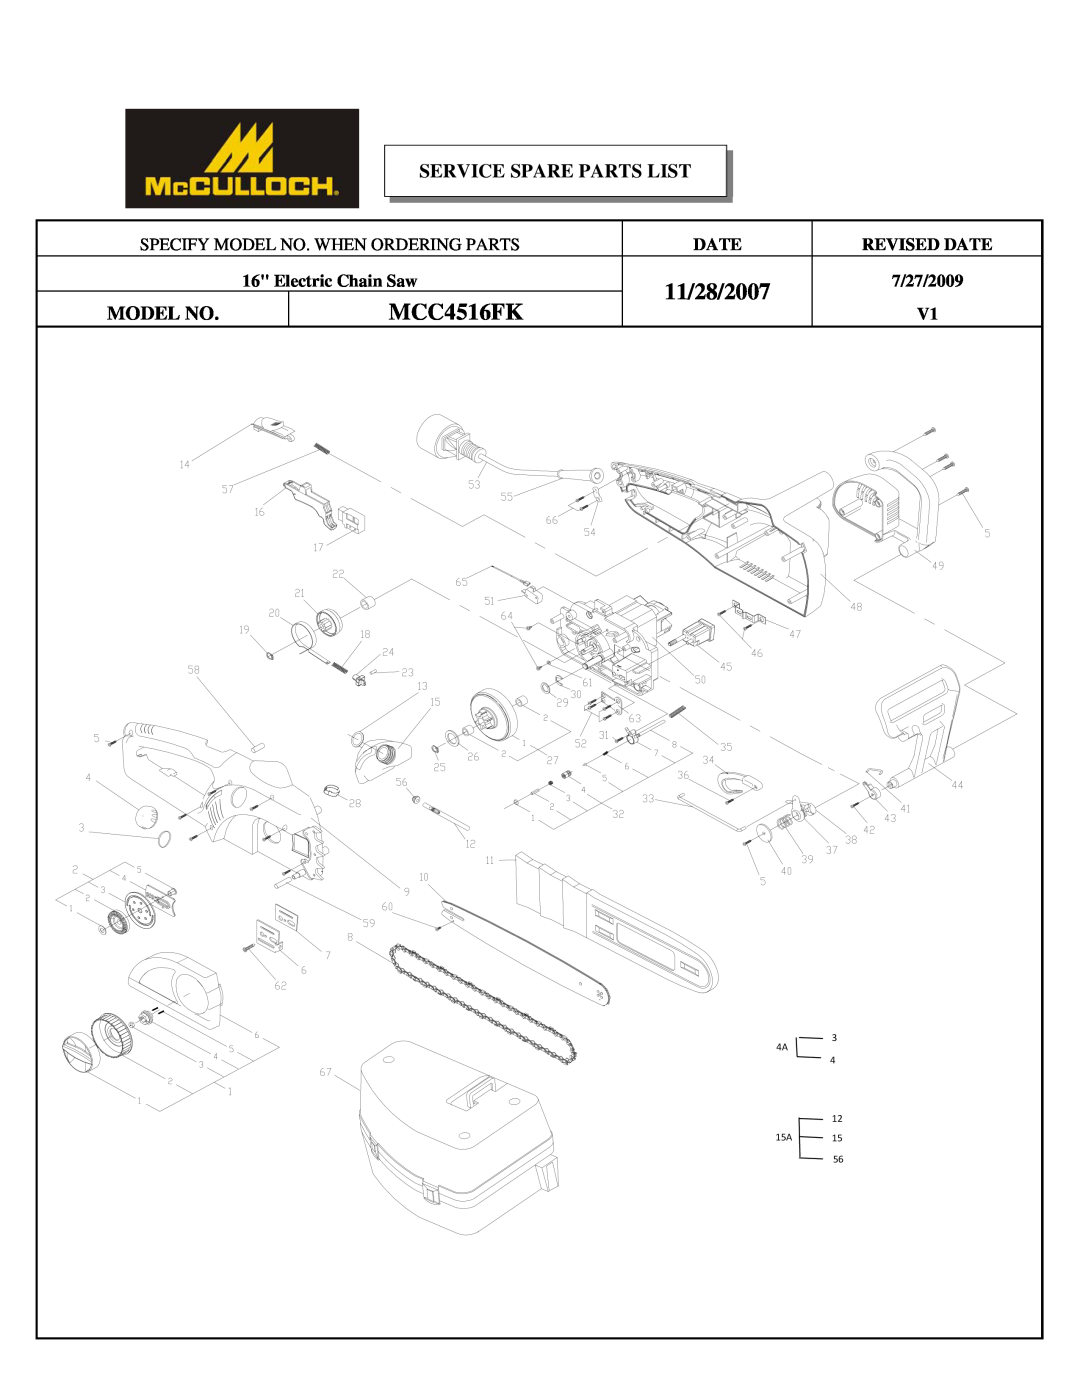 McCulloch MCC4516FK manual 11/28/2007, Specify Model No. When Ordering Parts, Revised Date, Electric Chain Saw 